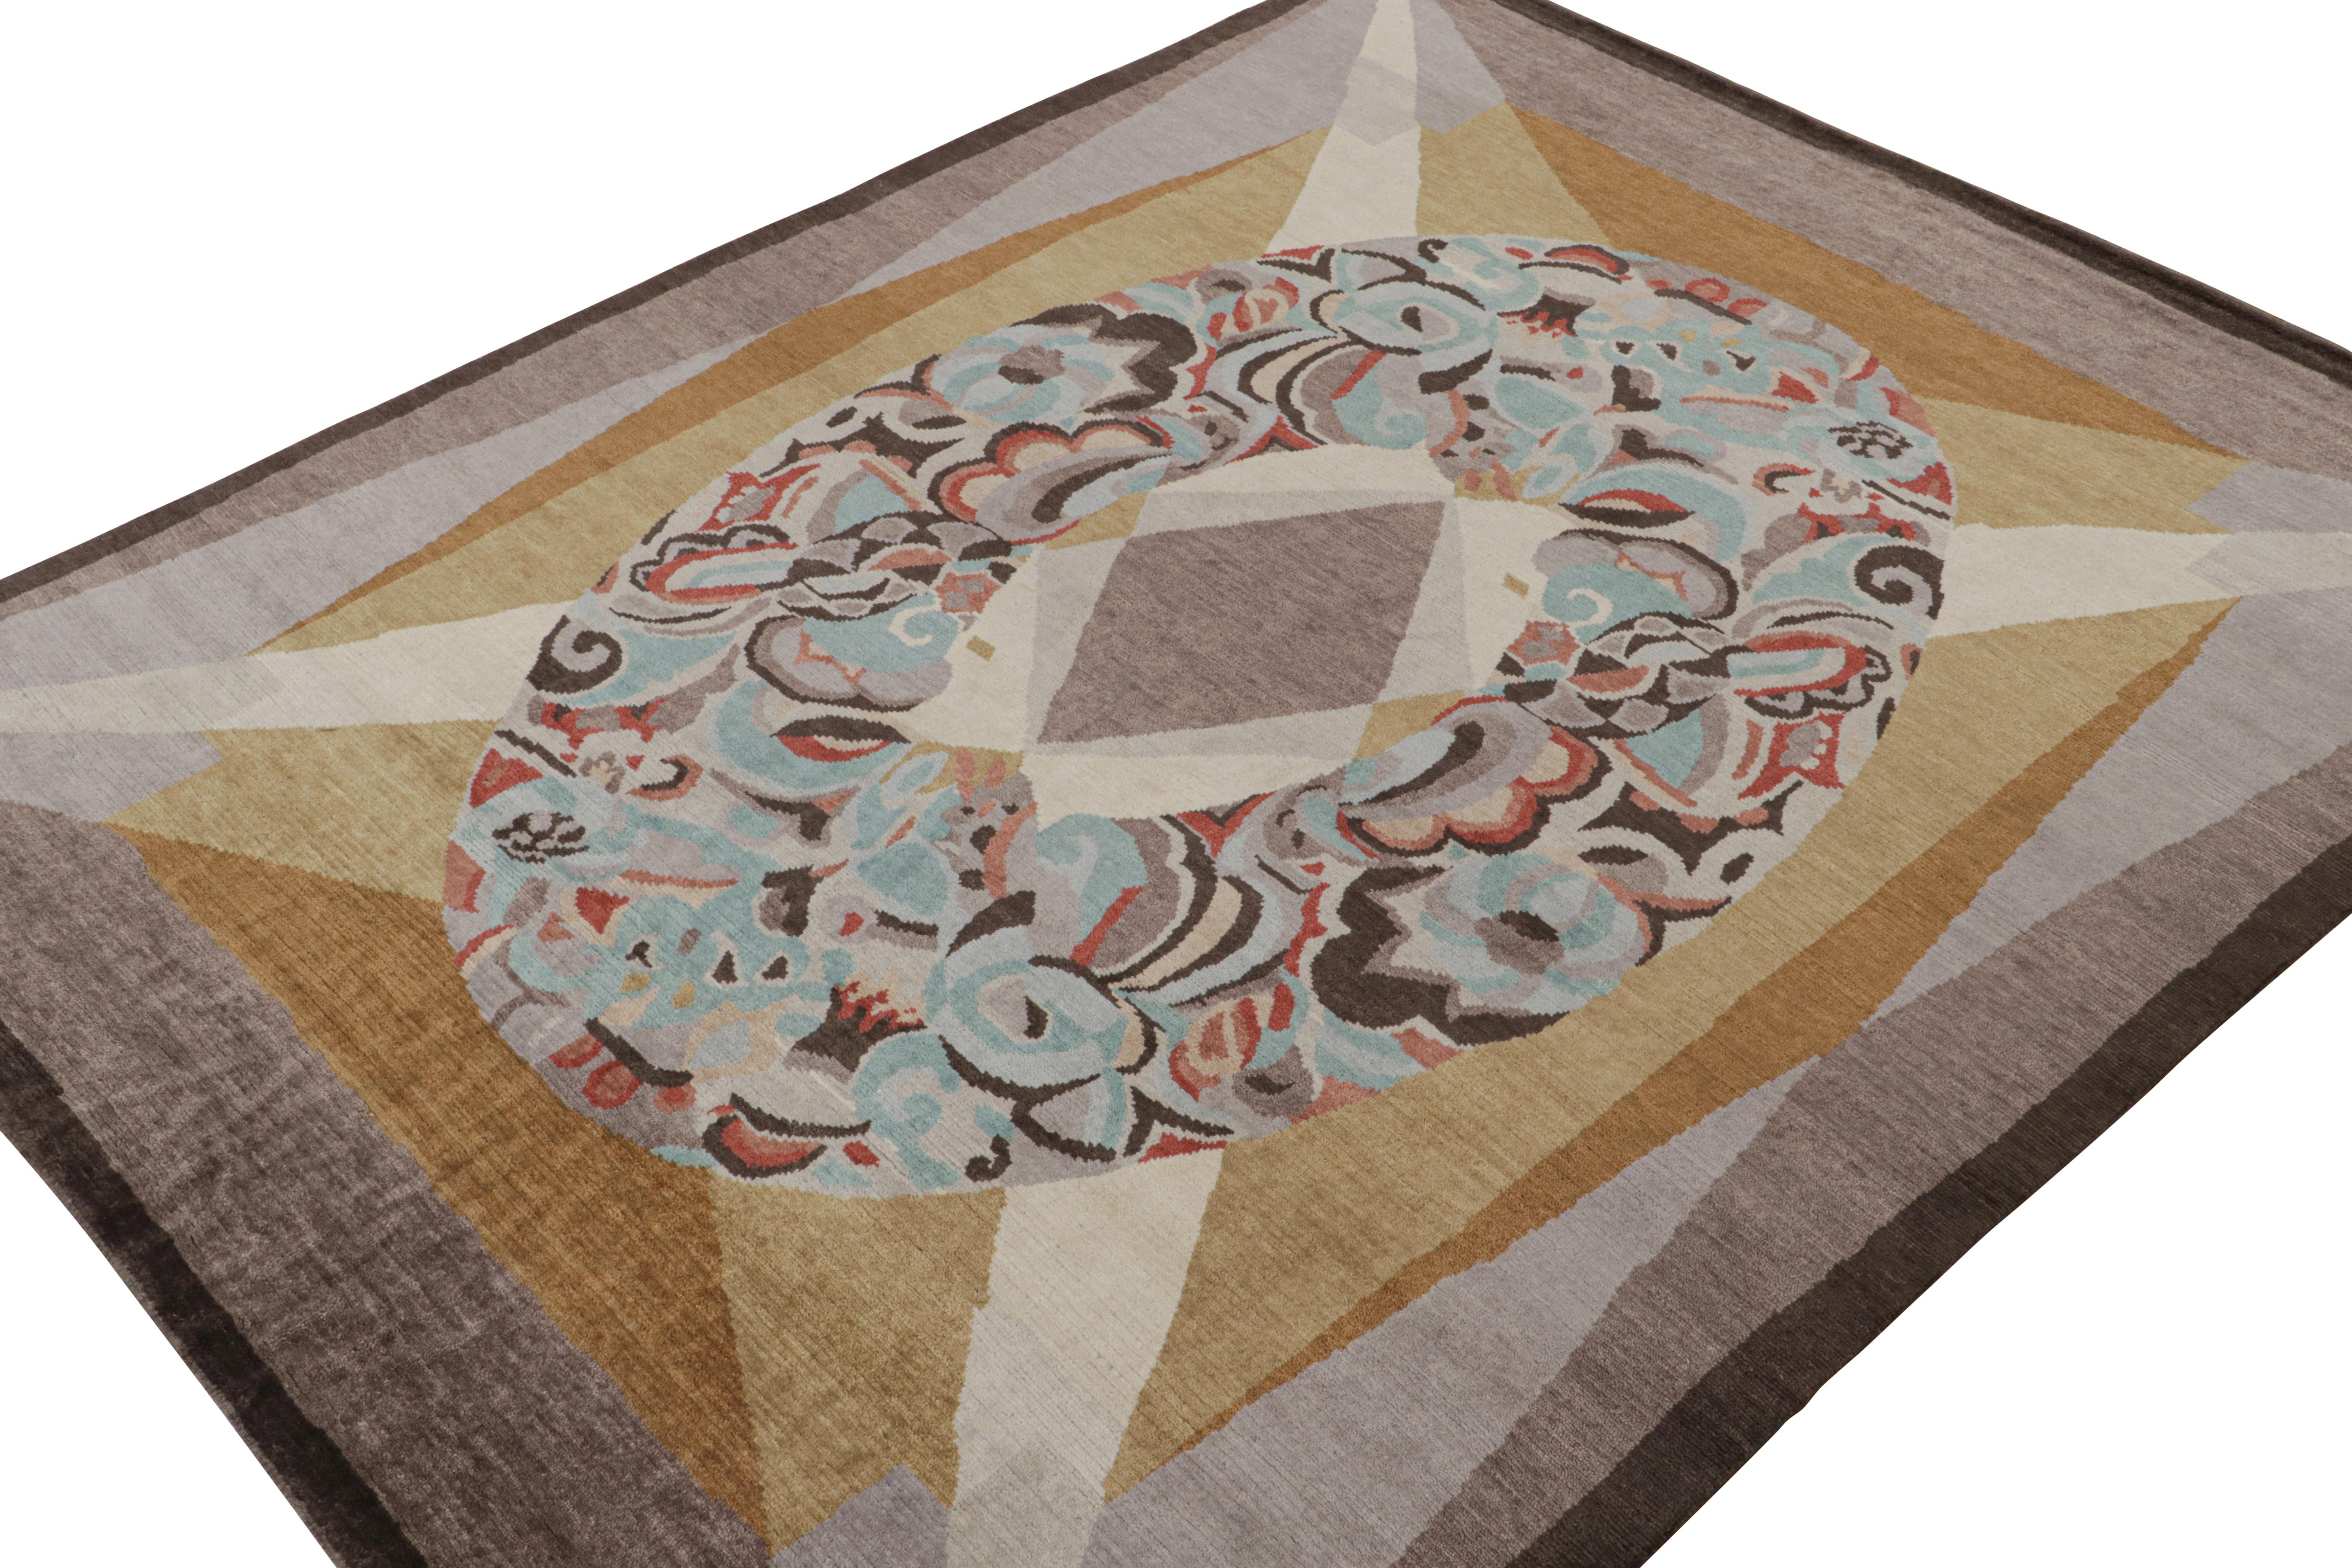 Hand-knotted in wool, this 9x12 modern rug is from the French Art Deco rug collection by Rug & Kilim.

On the design

This piece is inspired by the titular European style of the 1920s, and enjoys a large-scale medallion with blue and red over